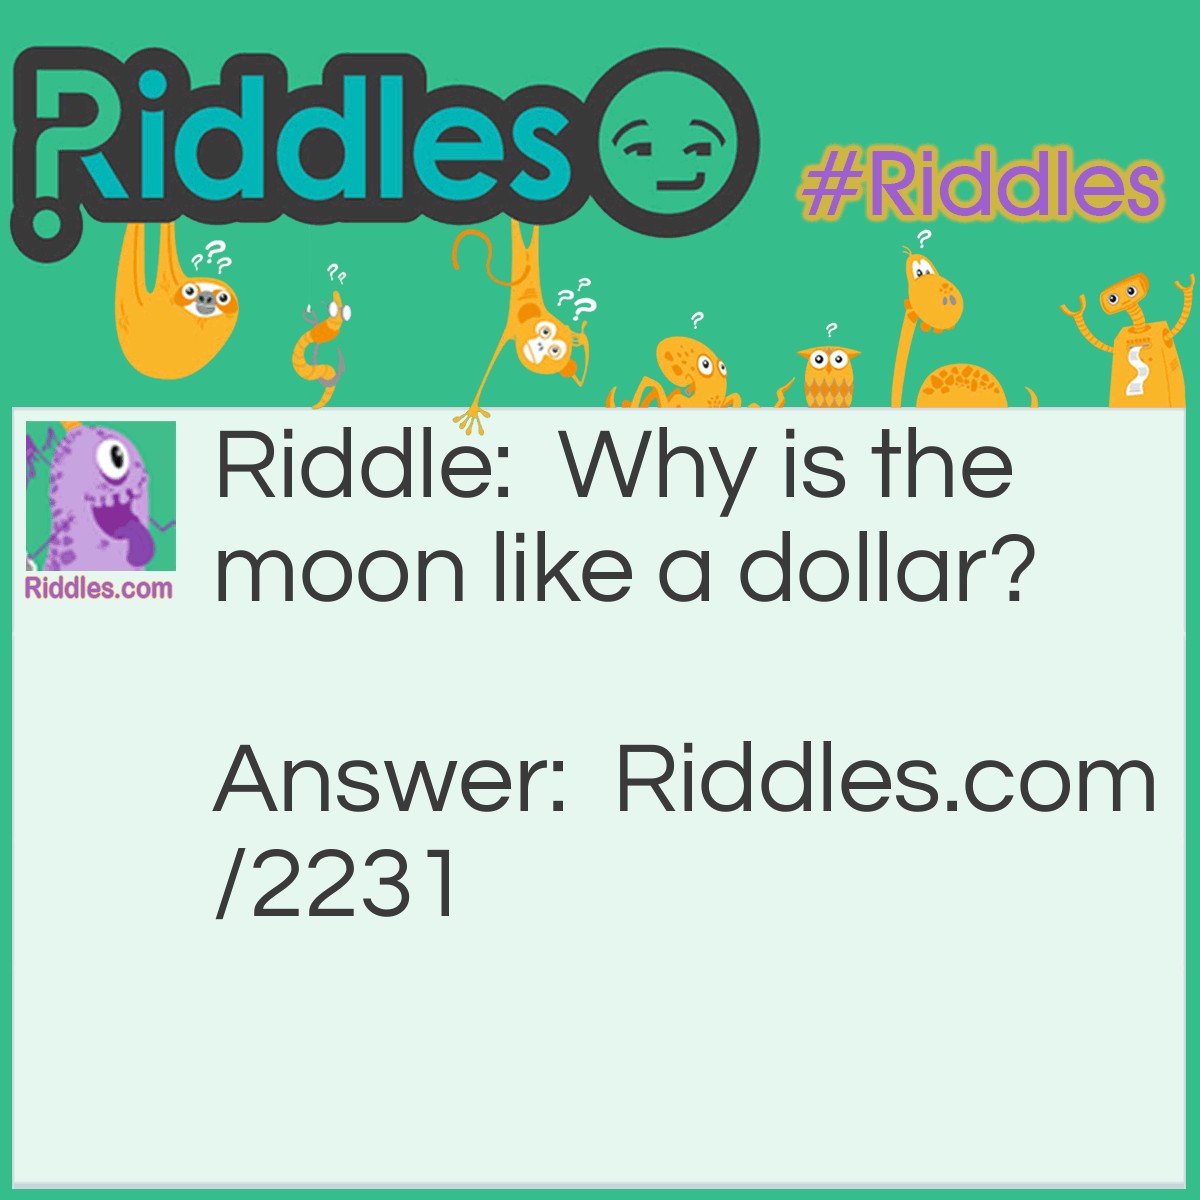 Riddle: Why is the moon like a dollar? Answer: Because it has four quarters.